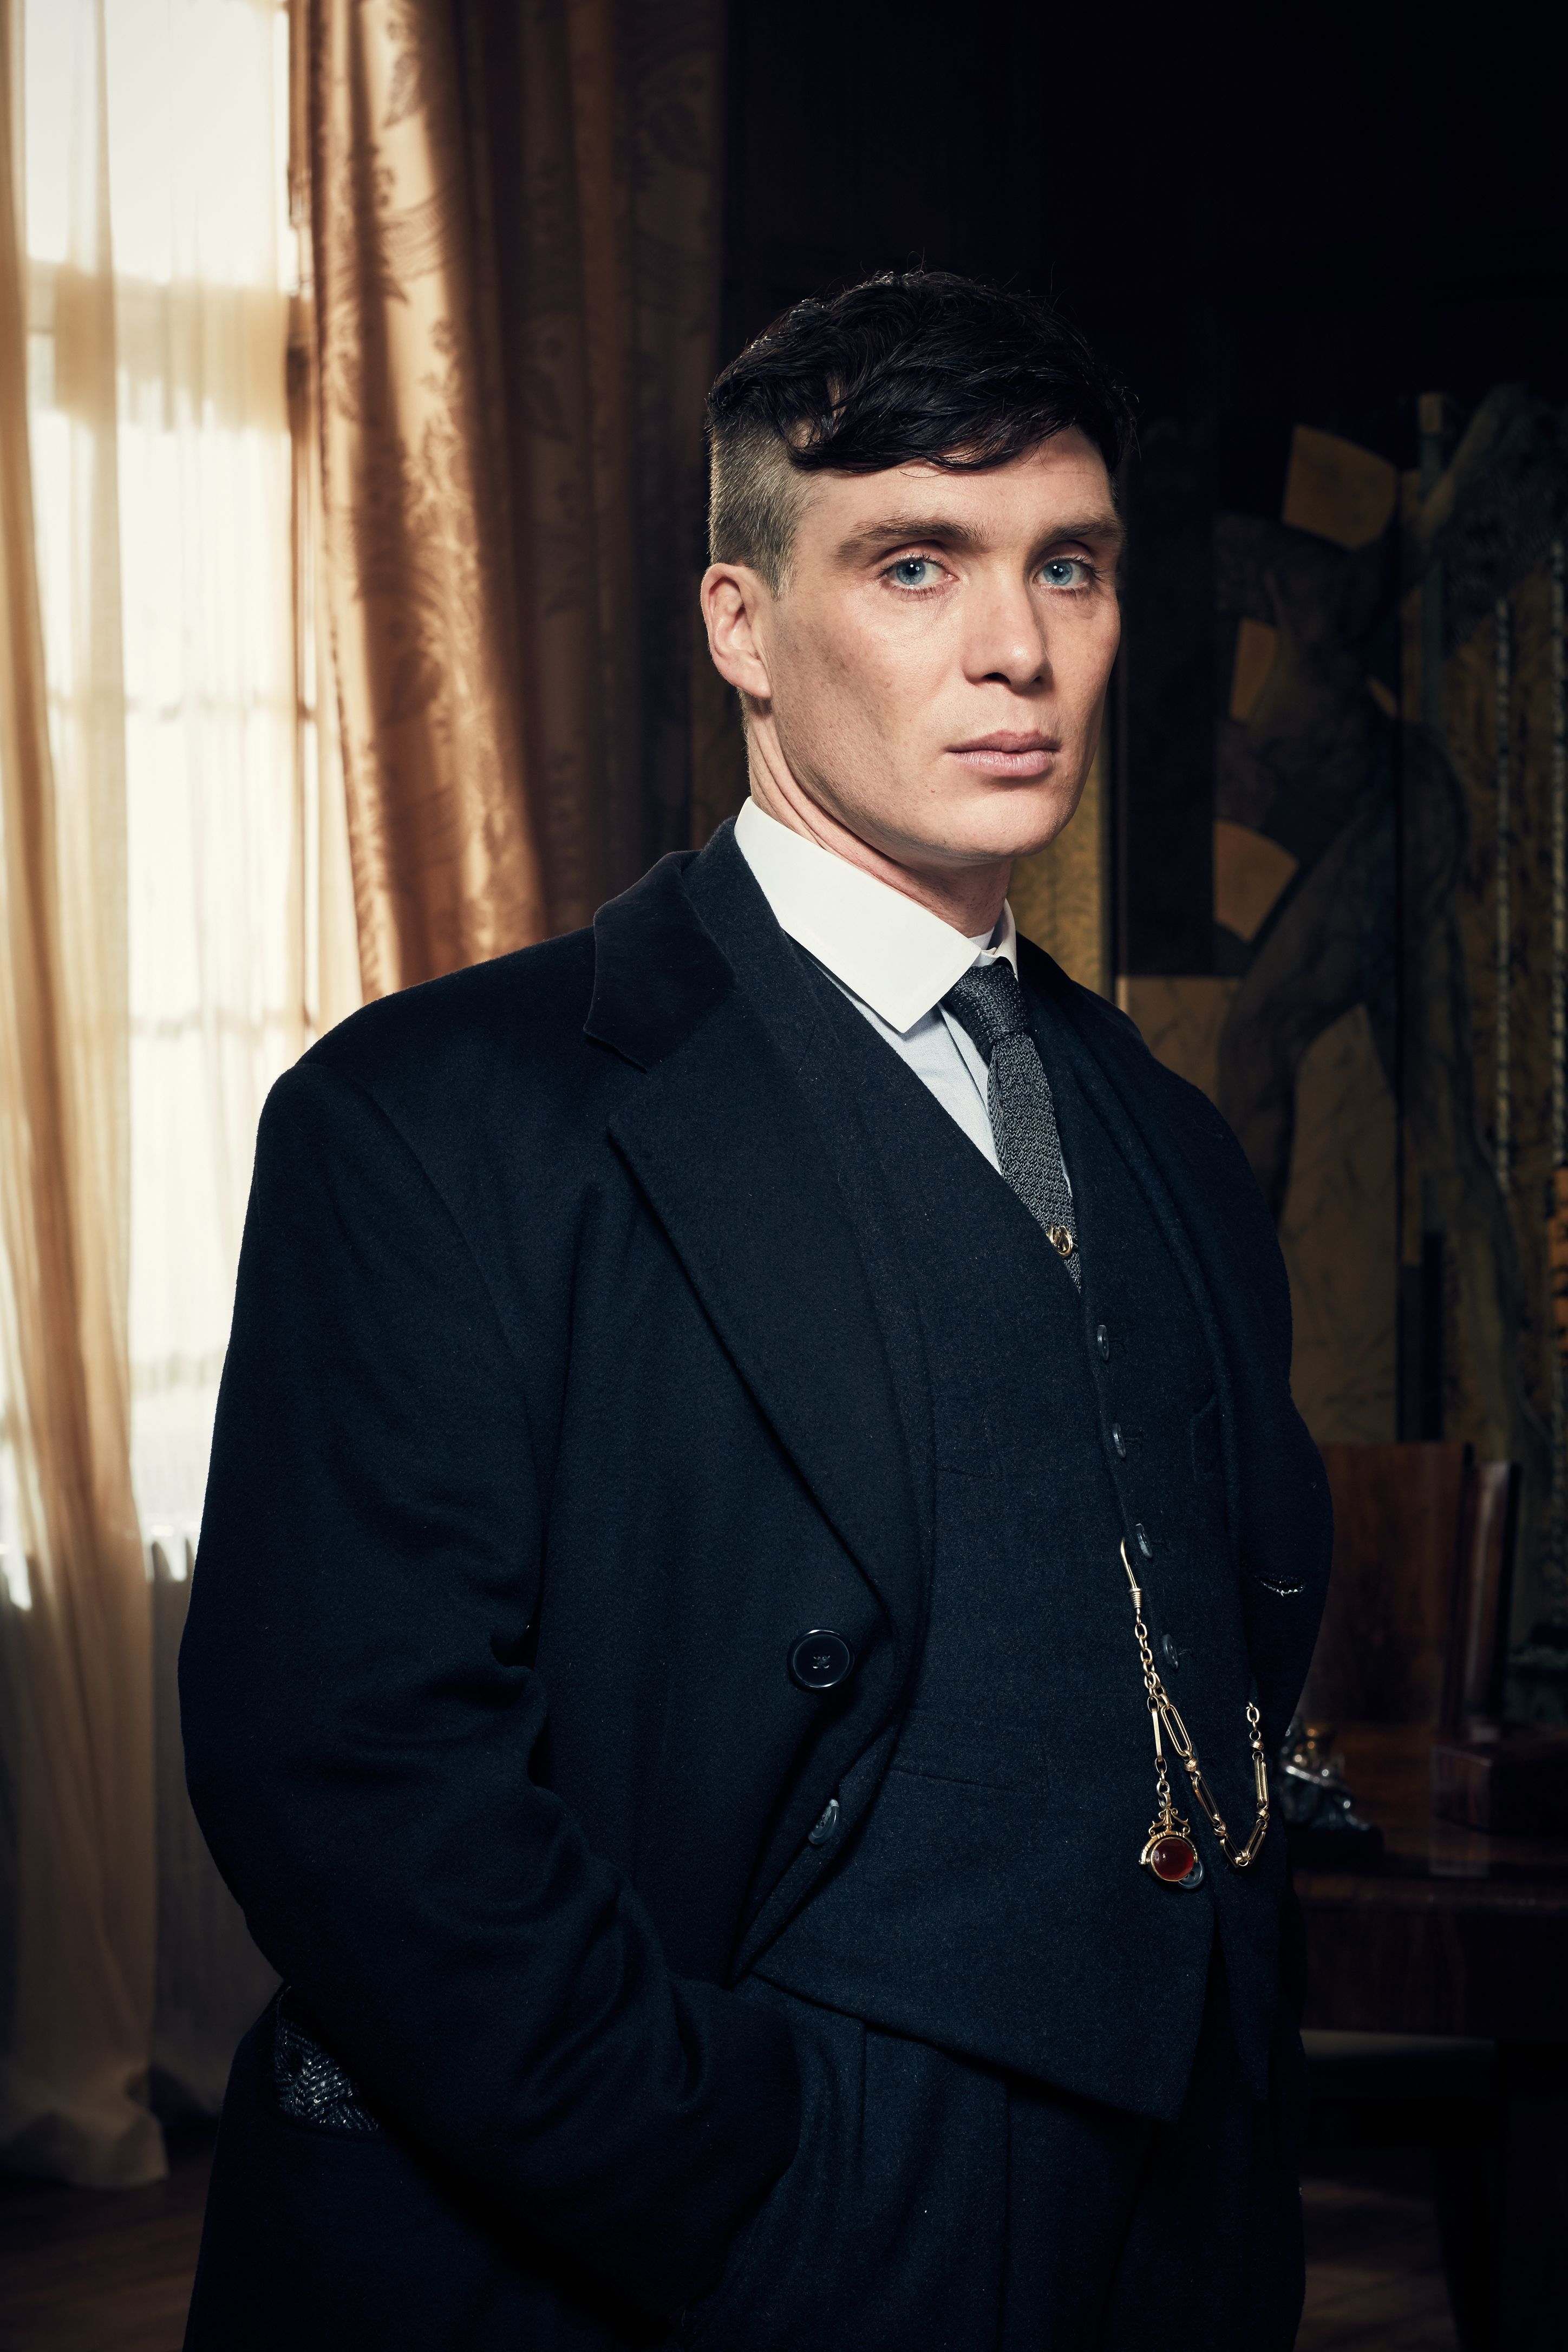 A Guide To The Peaky Blinders Haircuts The 5 Haircuts From The Main  Characters